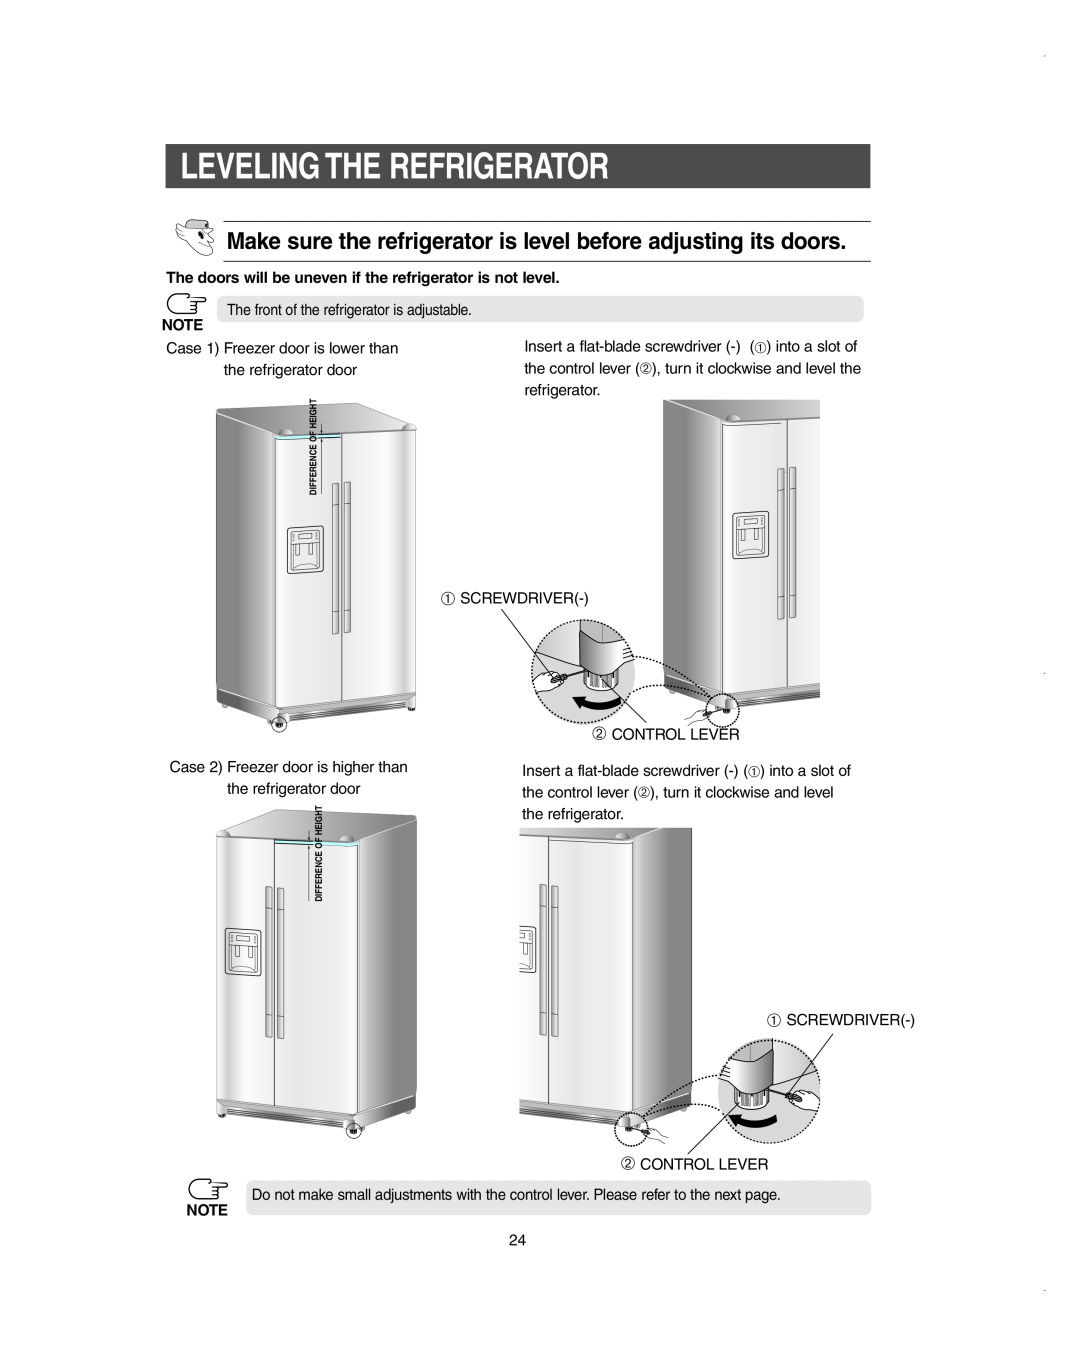 Samsung RS275ACBP/XAA Leveling The Refrigerator, Make sure the refrigerator is level before adjusting its doors 